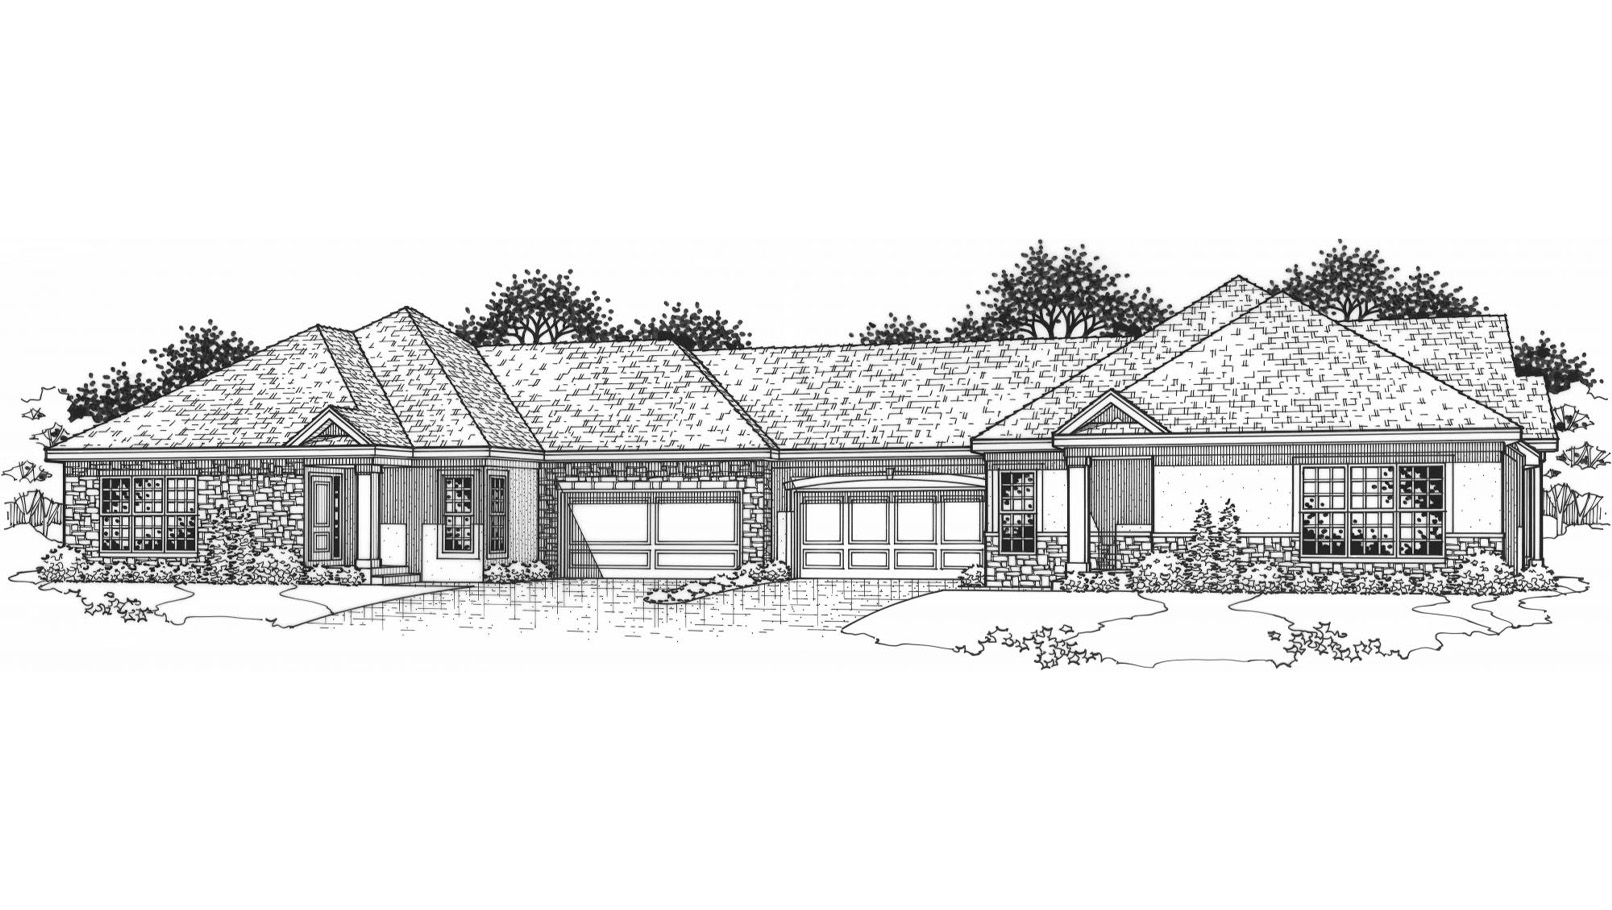 Black and white front elevation of the Todd model from Lambie Homes